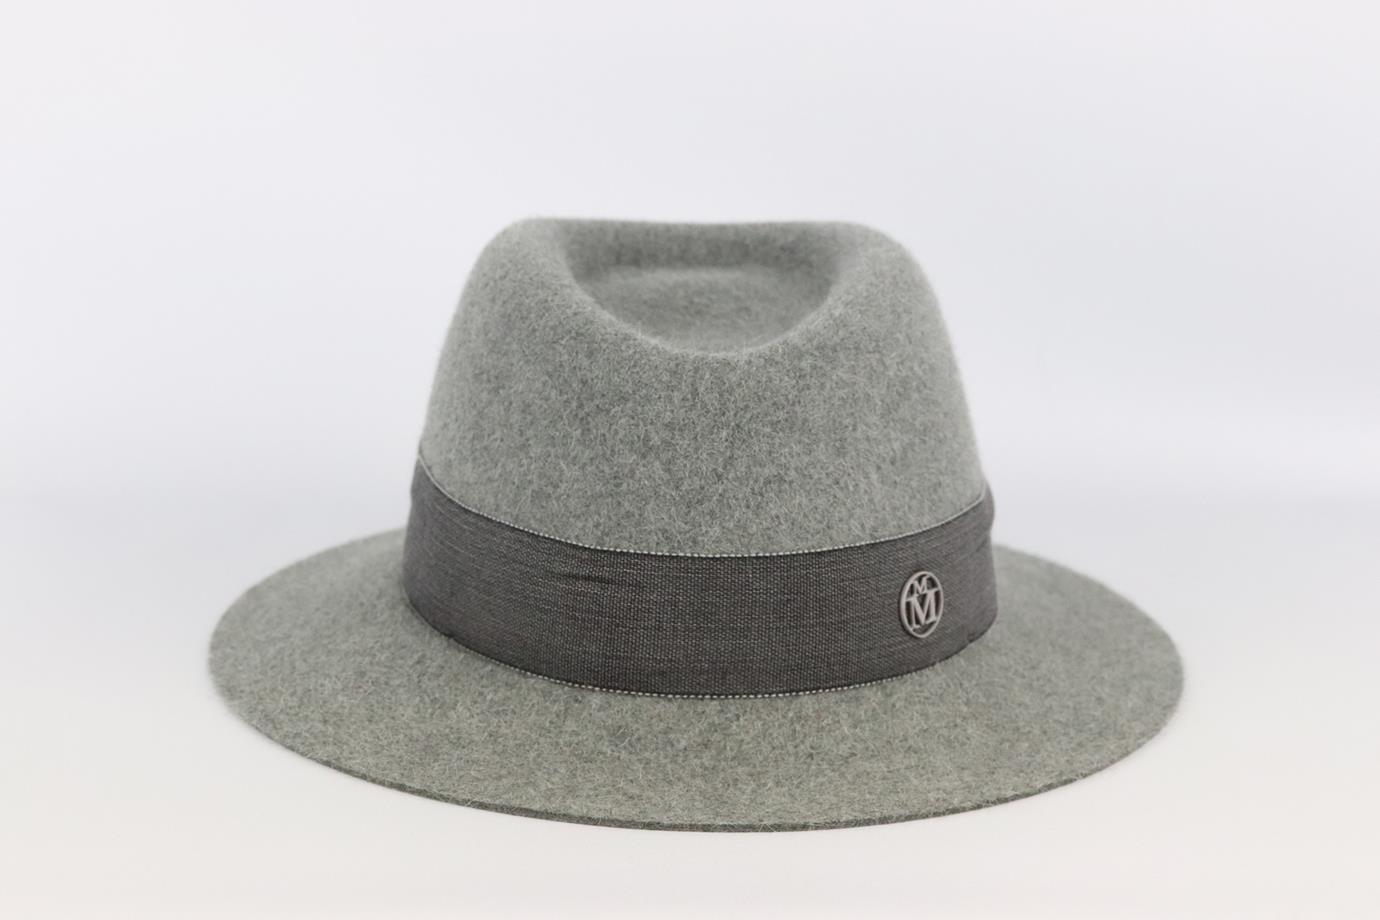 Maison Michel grosgrain trimmed wool felt fedora. Green. Pull on. 100% Wool; trim: 56% cotton, 44% viscose. Does not come with dustbag or box. Size: Medium. Circumference: 23.6 in. Brim Width: 3.25 in. Very good condition - No sign of wear; see